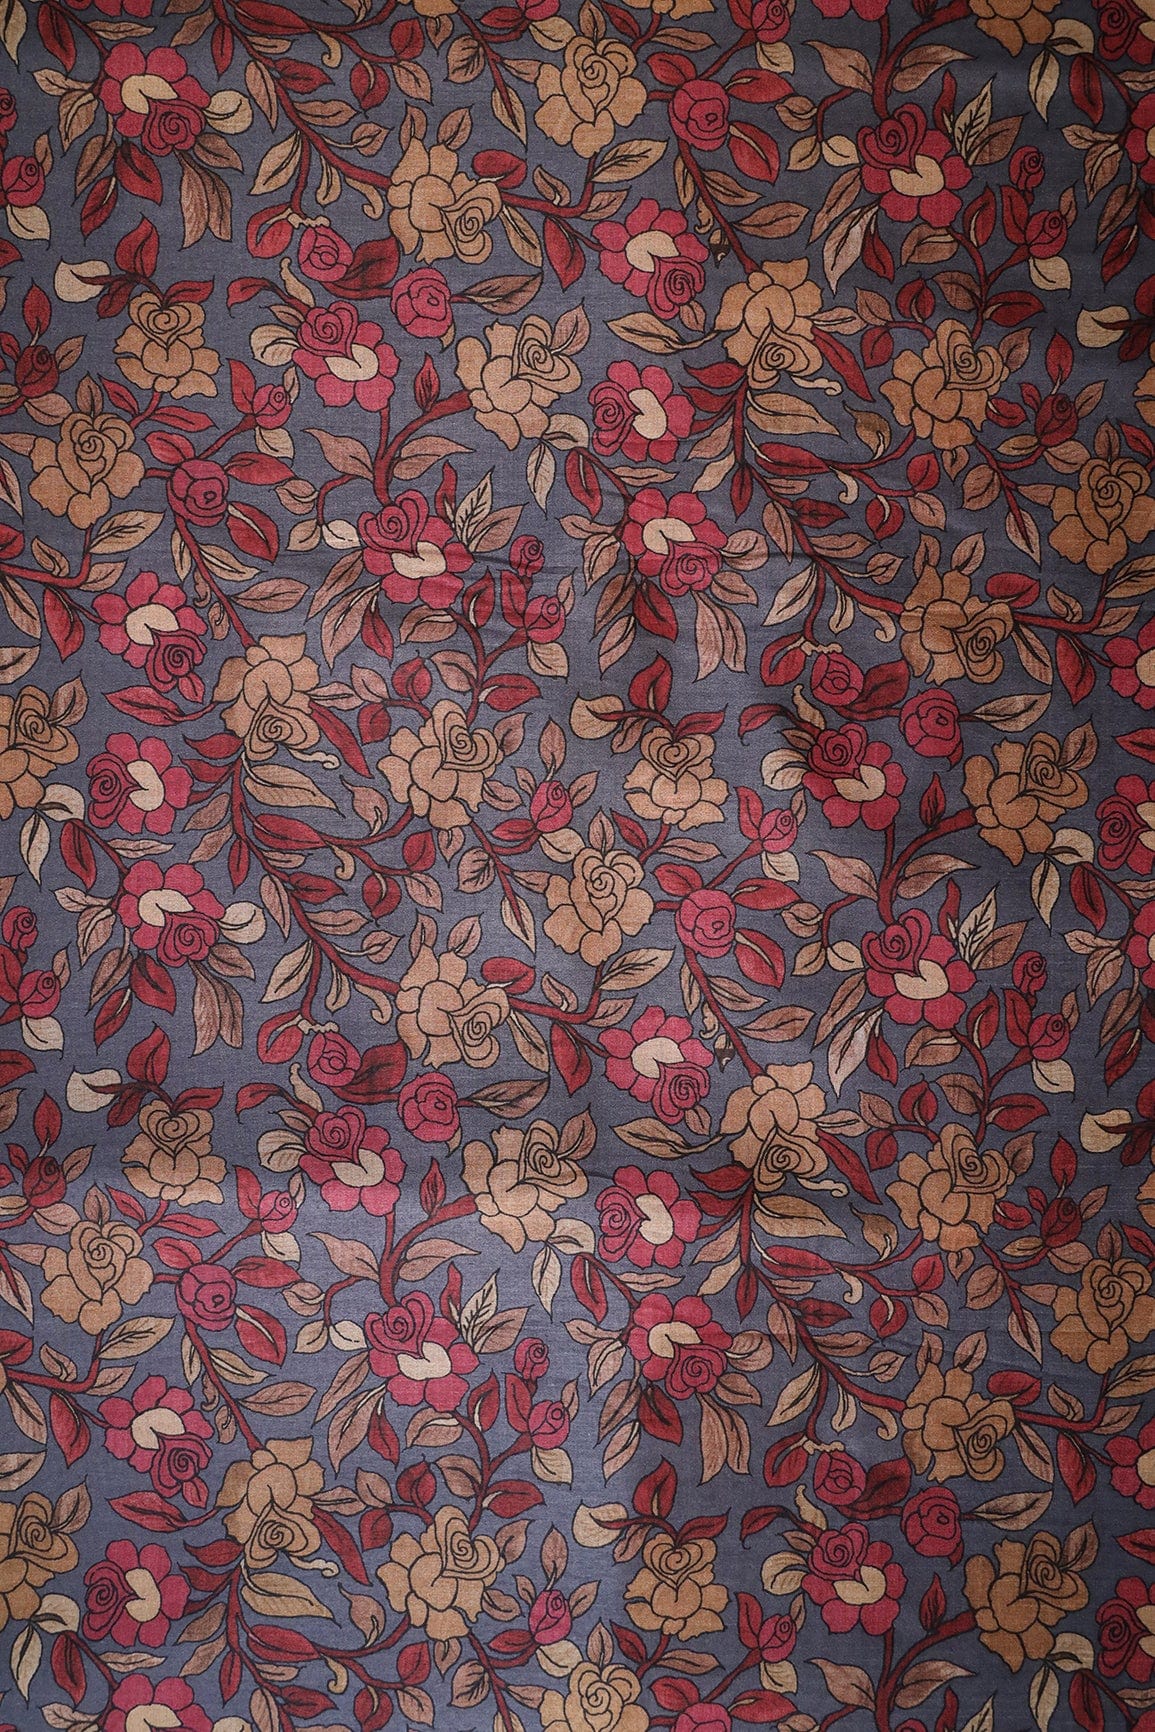 doeraa Prints Dark Grey And Red Floral Pattern Digital Print On Mulberry Silk Fabric